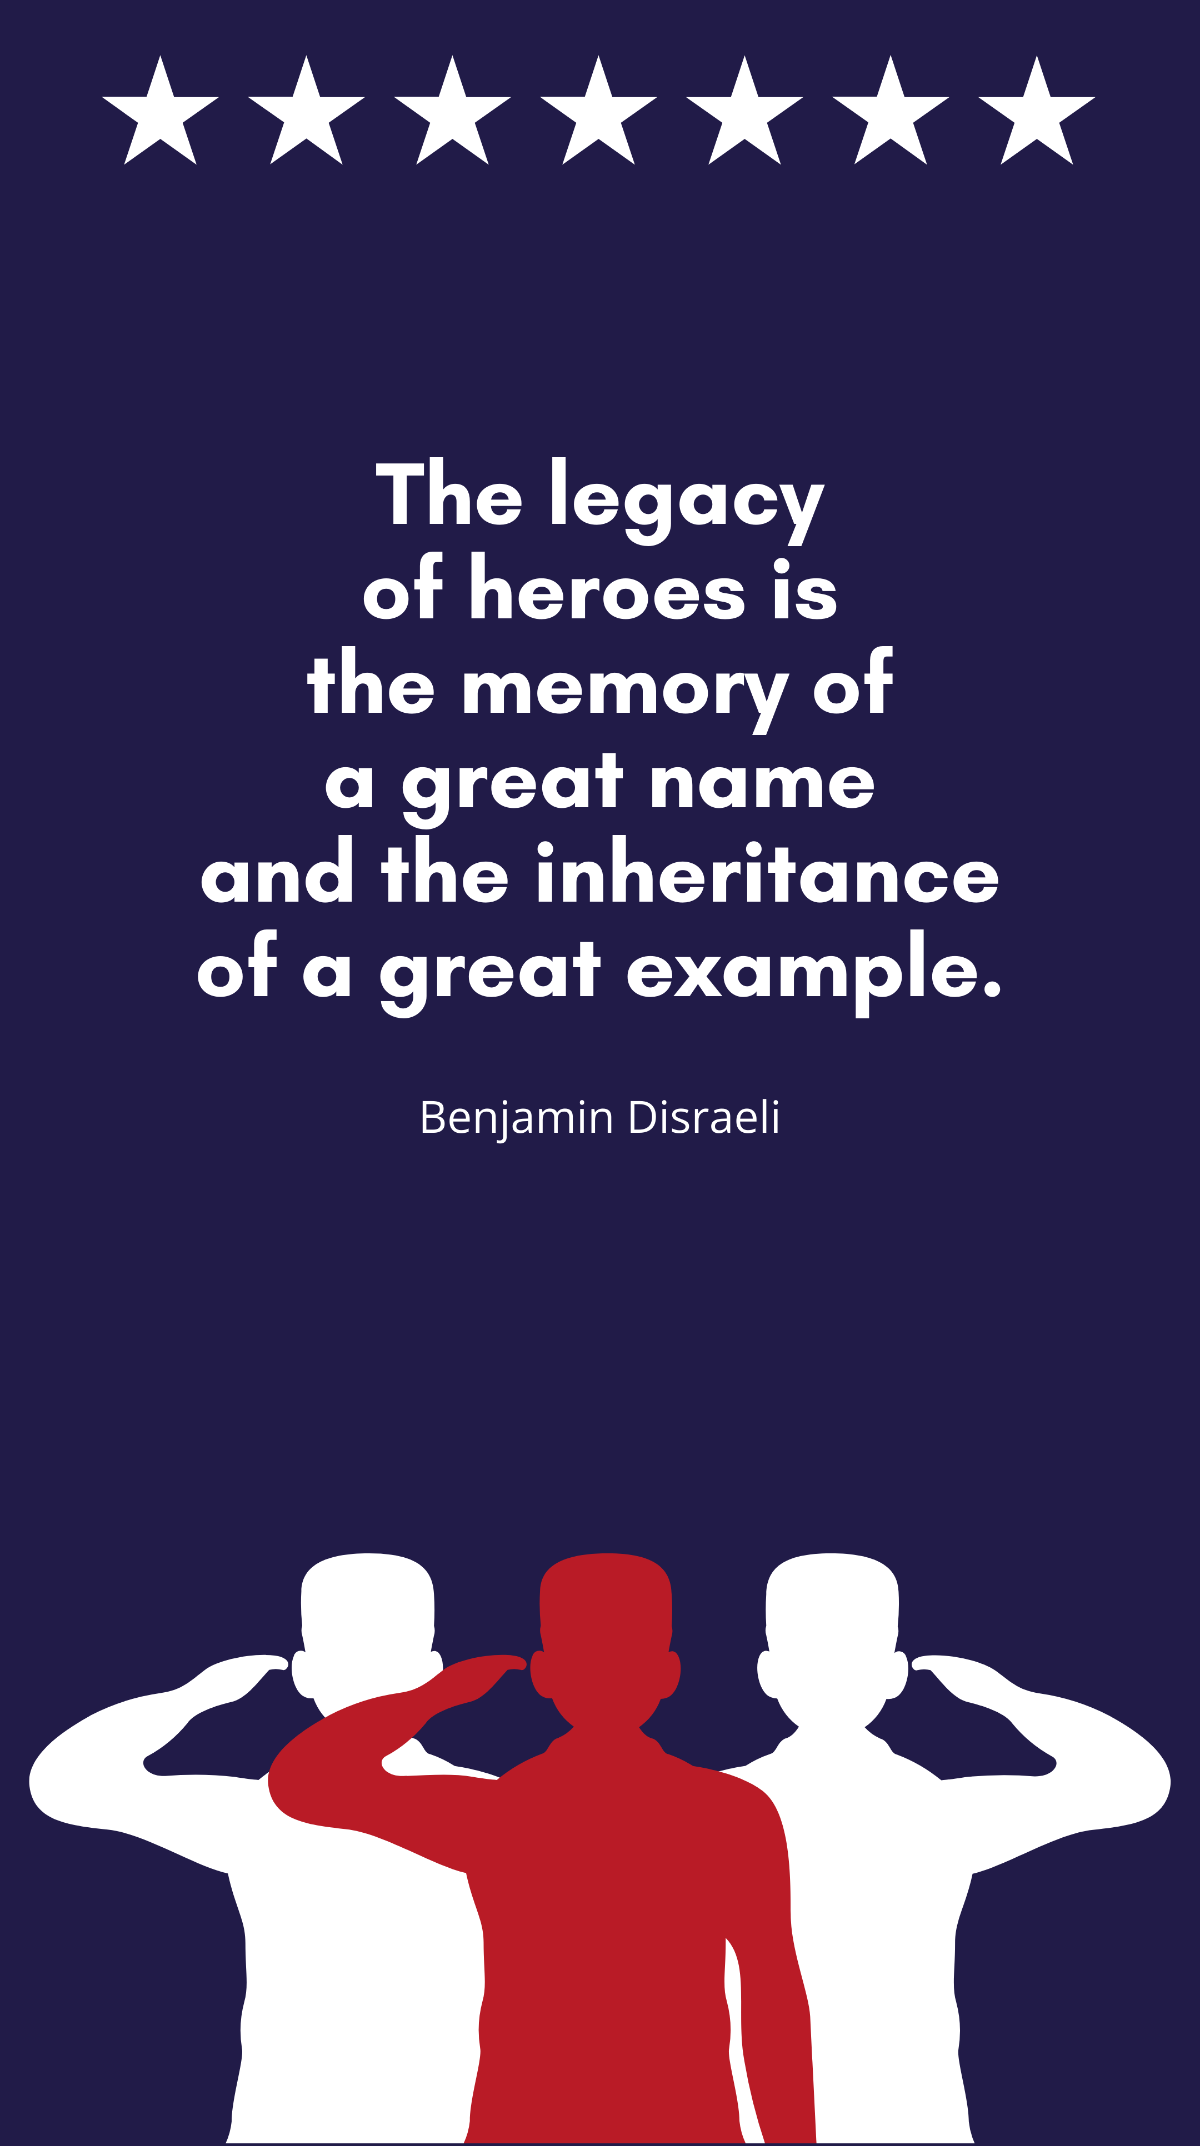 Benjamin Disraeli - “The legacy of heroes is the memory of a great name and the inheritance of a great example.” Template